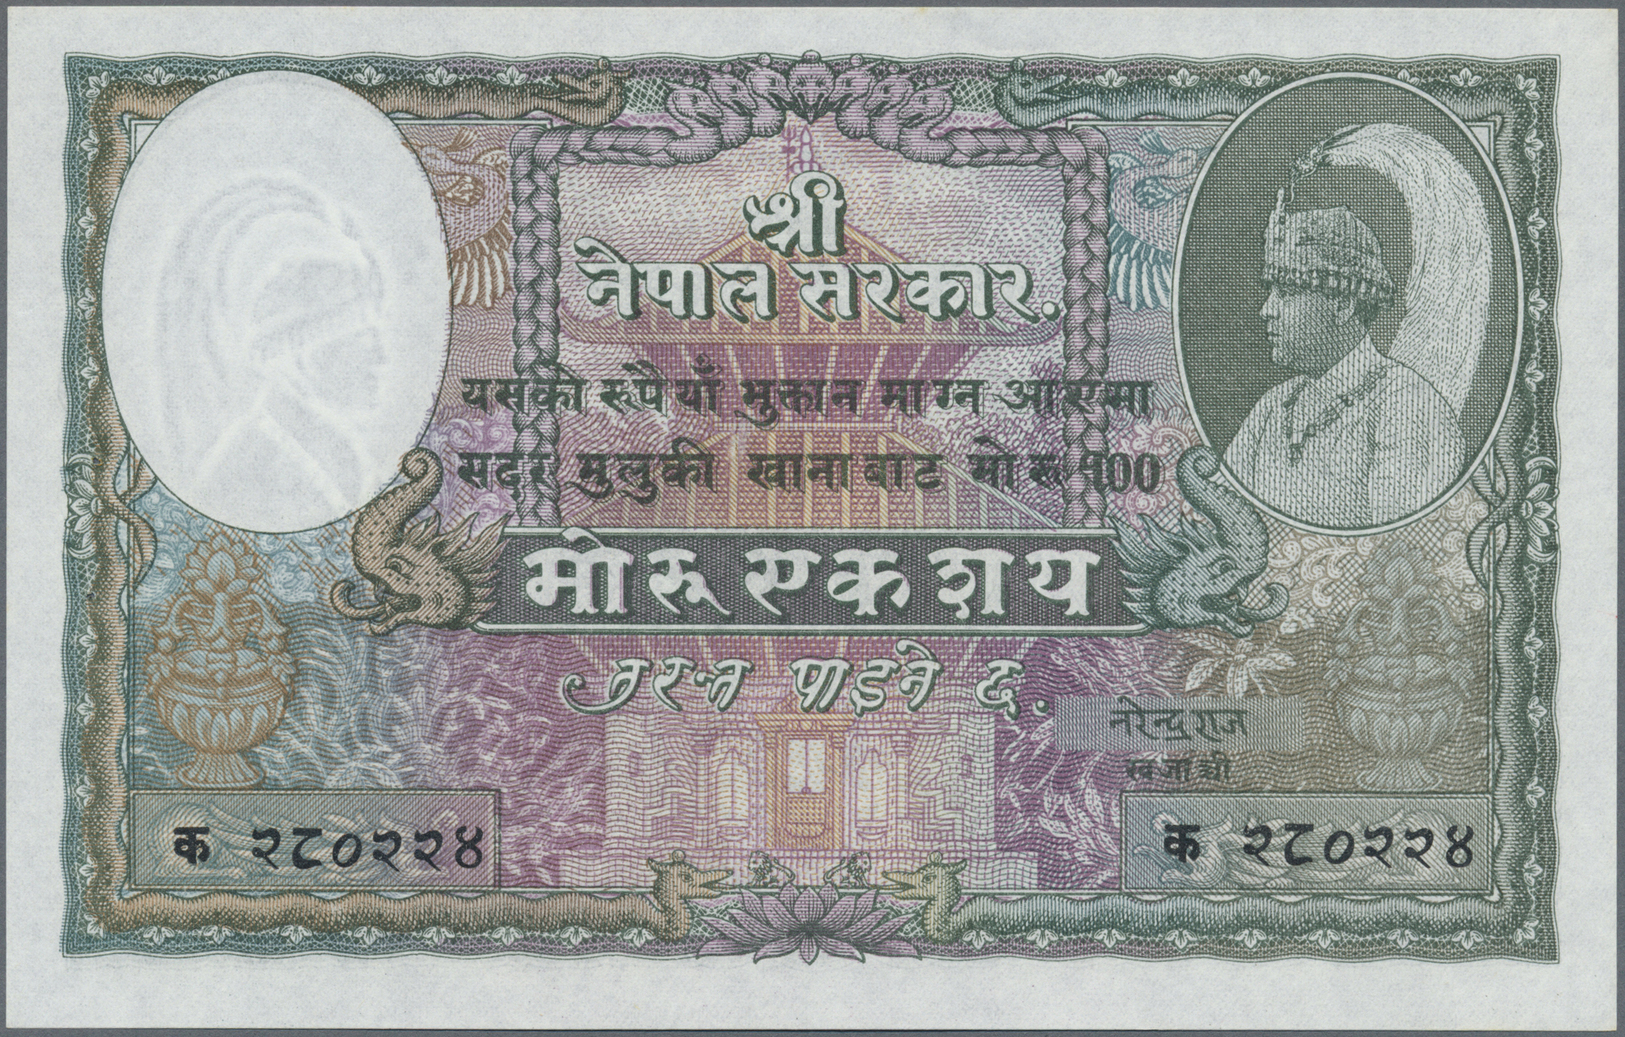 01775 Nepal: 100 Rupees ND P. 7, 2 Usual Pinholes, Condition: UNC. - Nepal